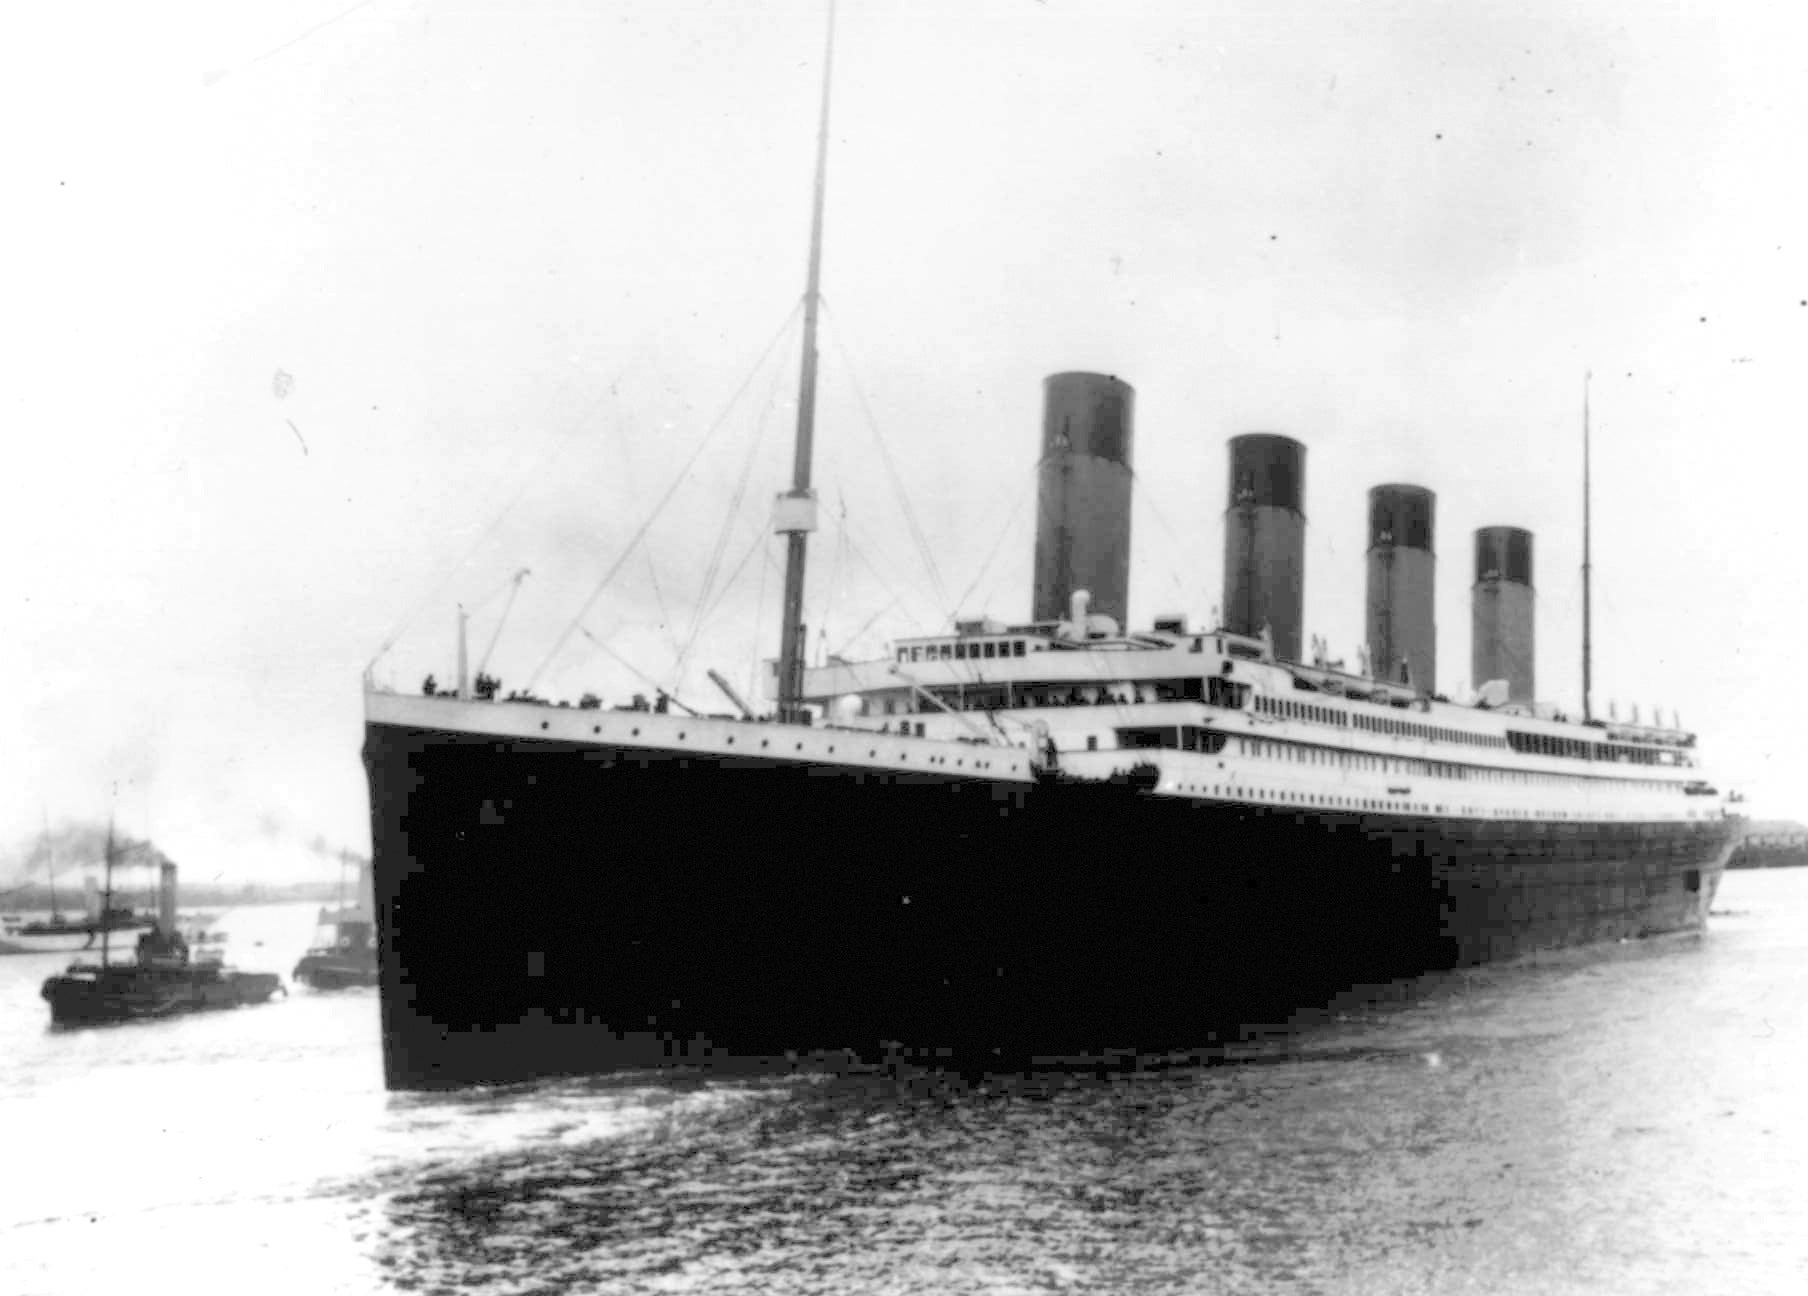 The remains of the submersible were discovered metres from the Titanic’s bow